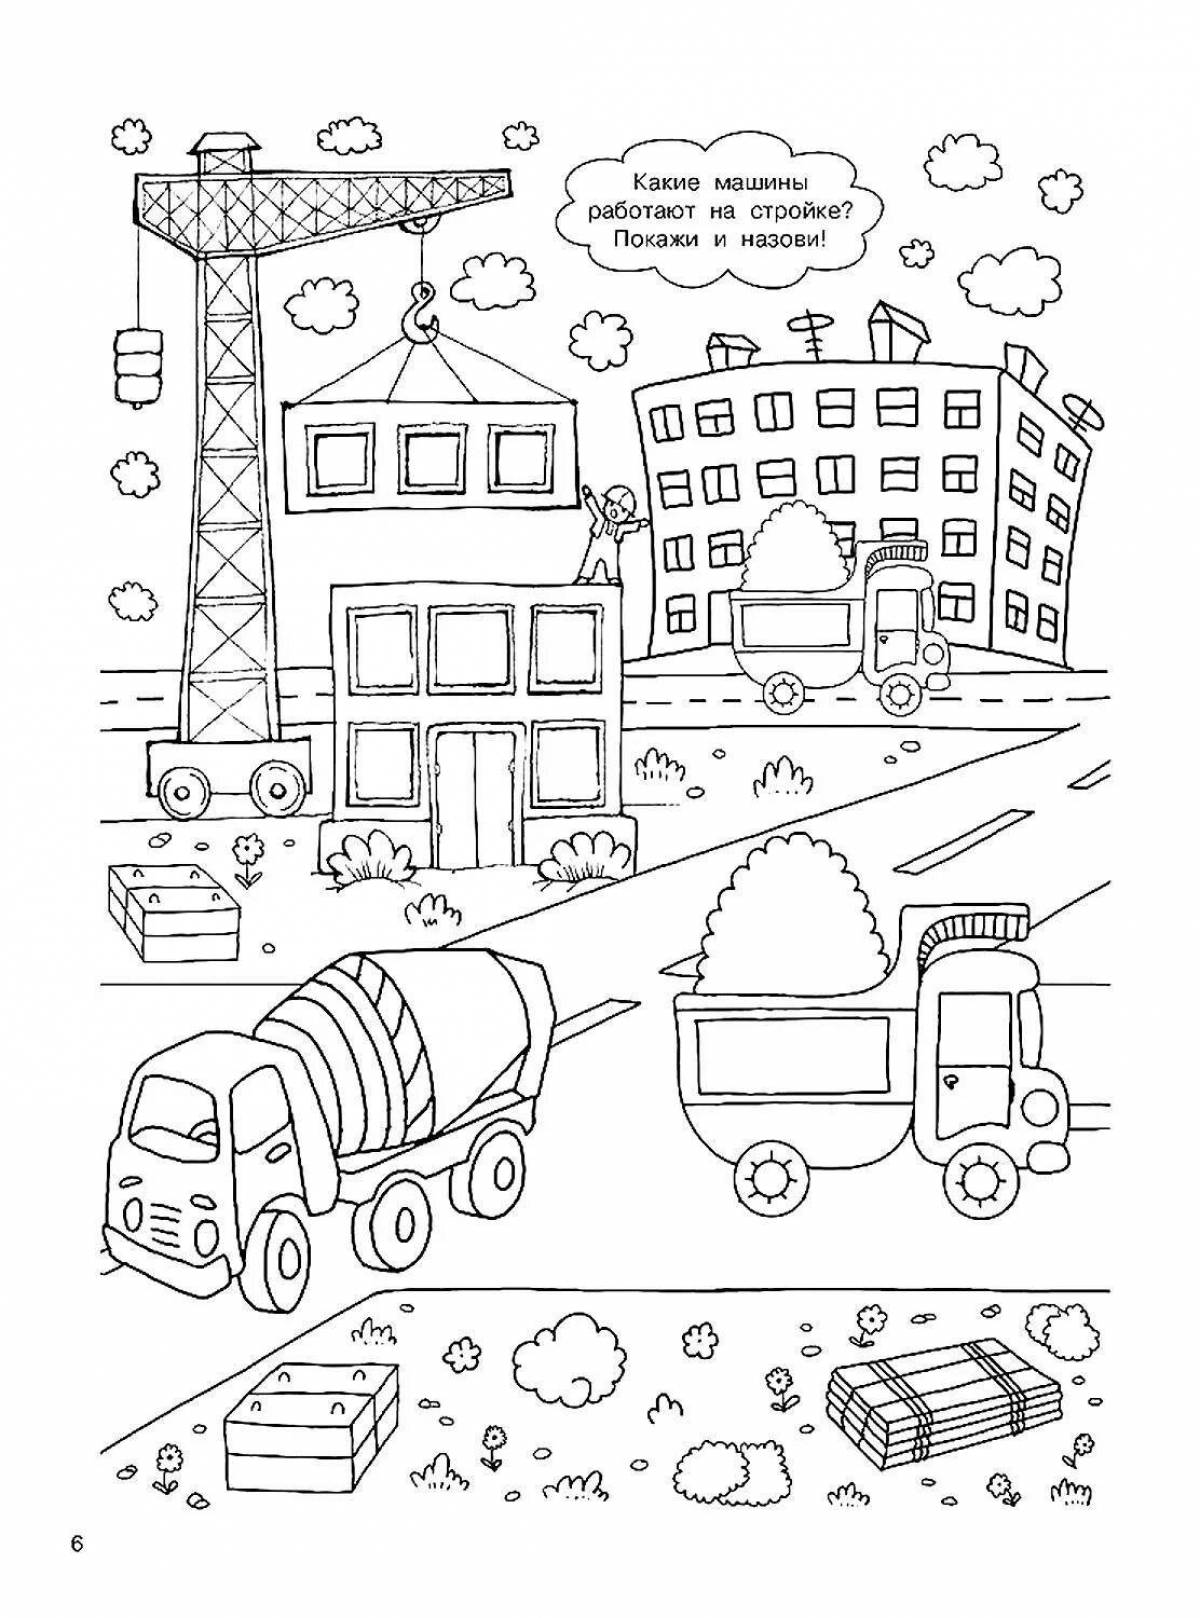 Incredible building coloring book for boys